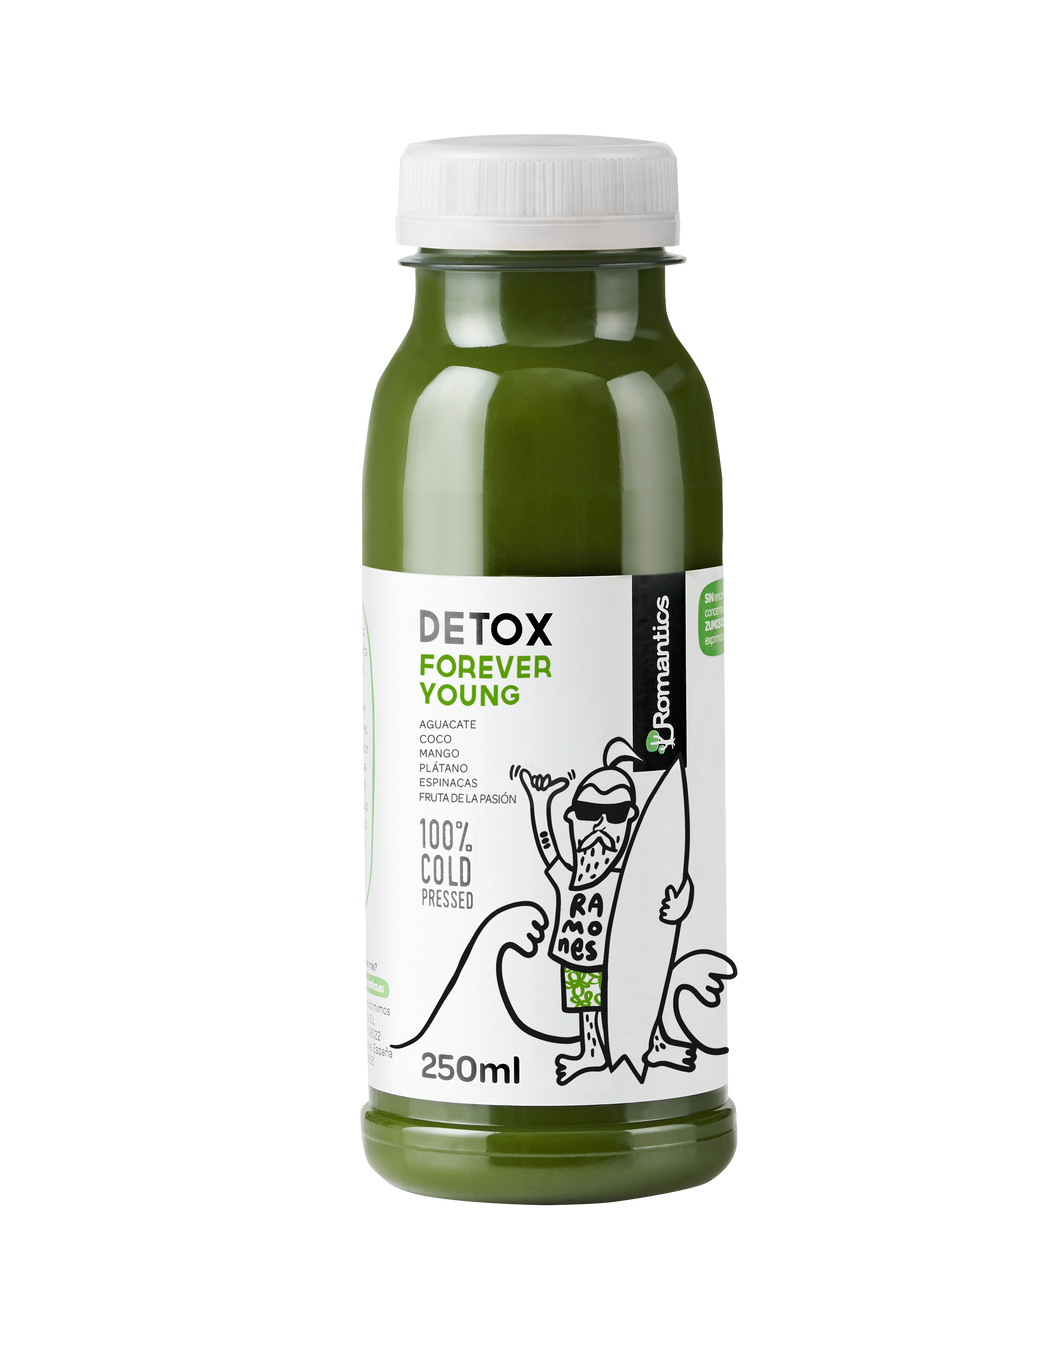 DETOX FOREVER YOUNG